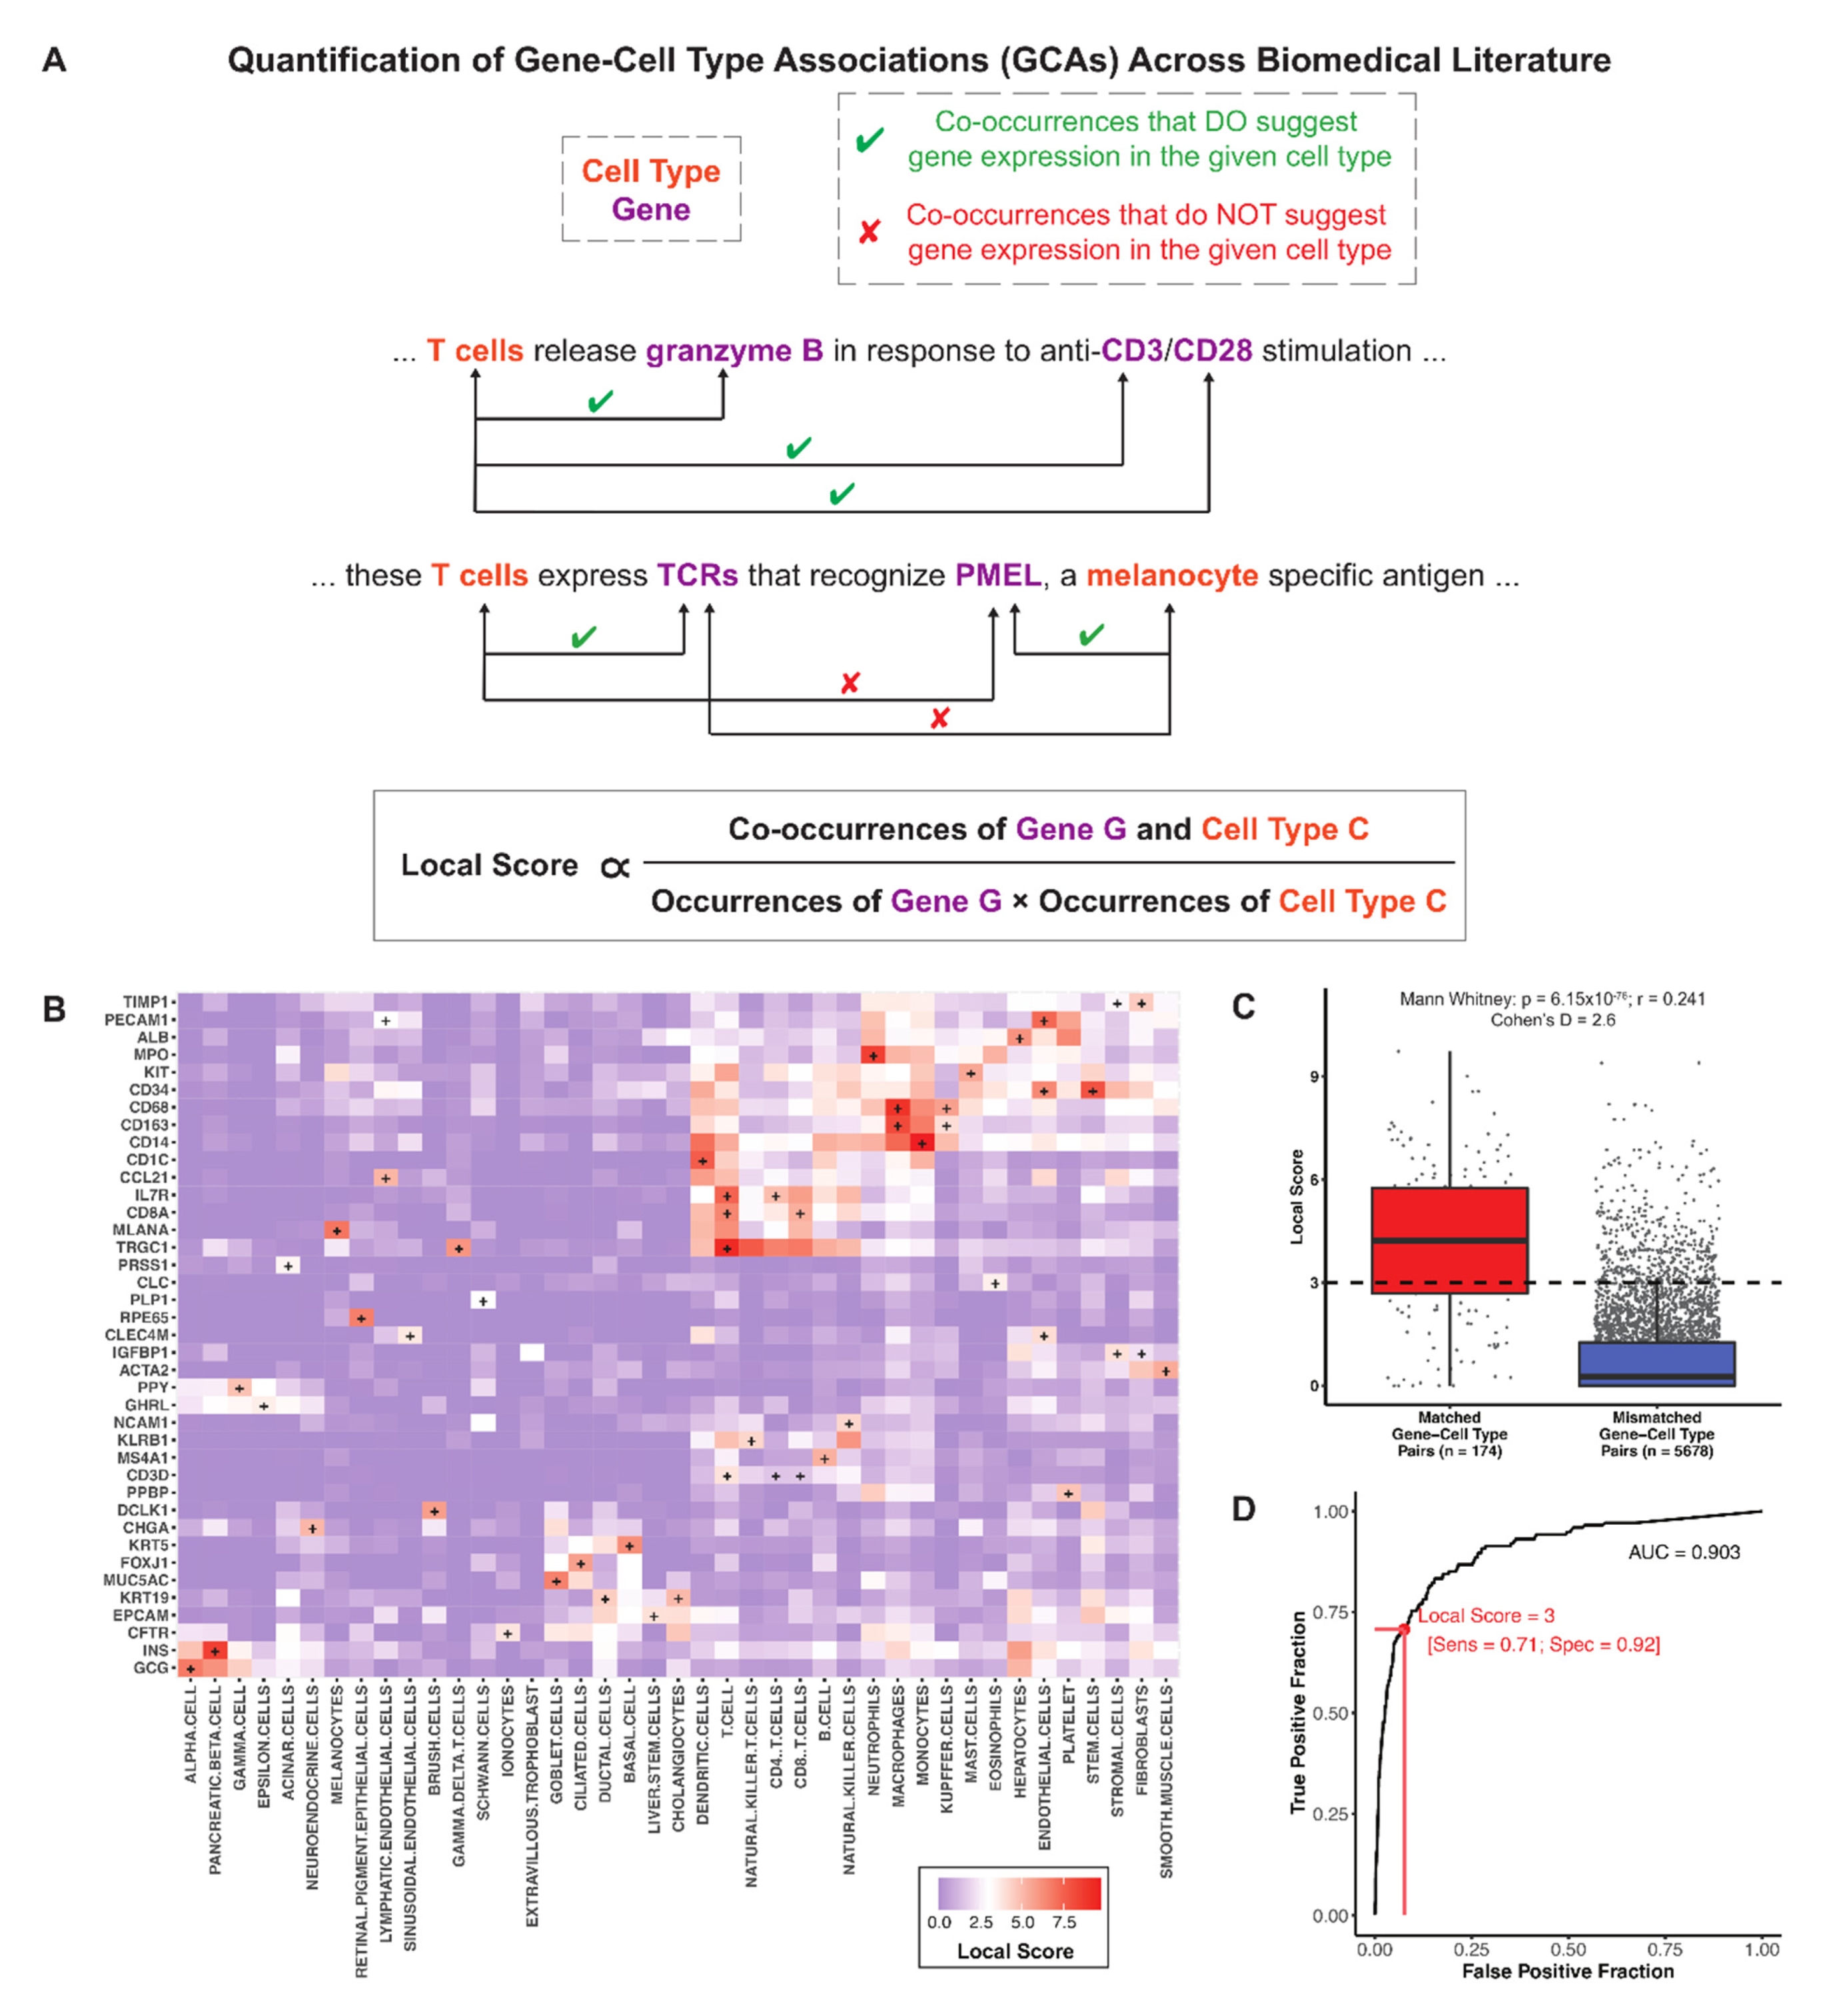 Low-coverage single-cell mRNA sequencing reveals cellular heterogeneity and  activated signaling pathways in developing cerebral cortex